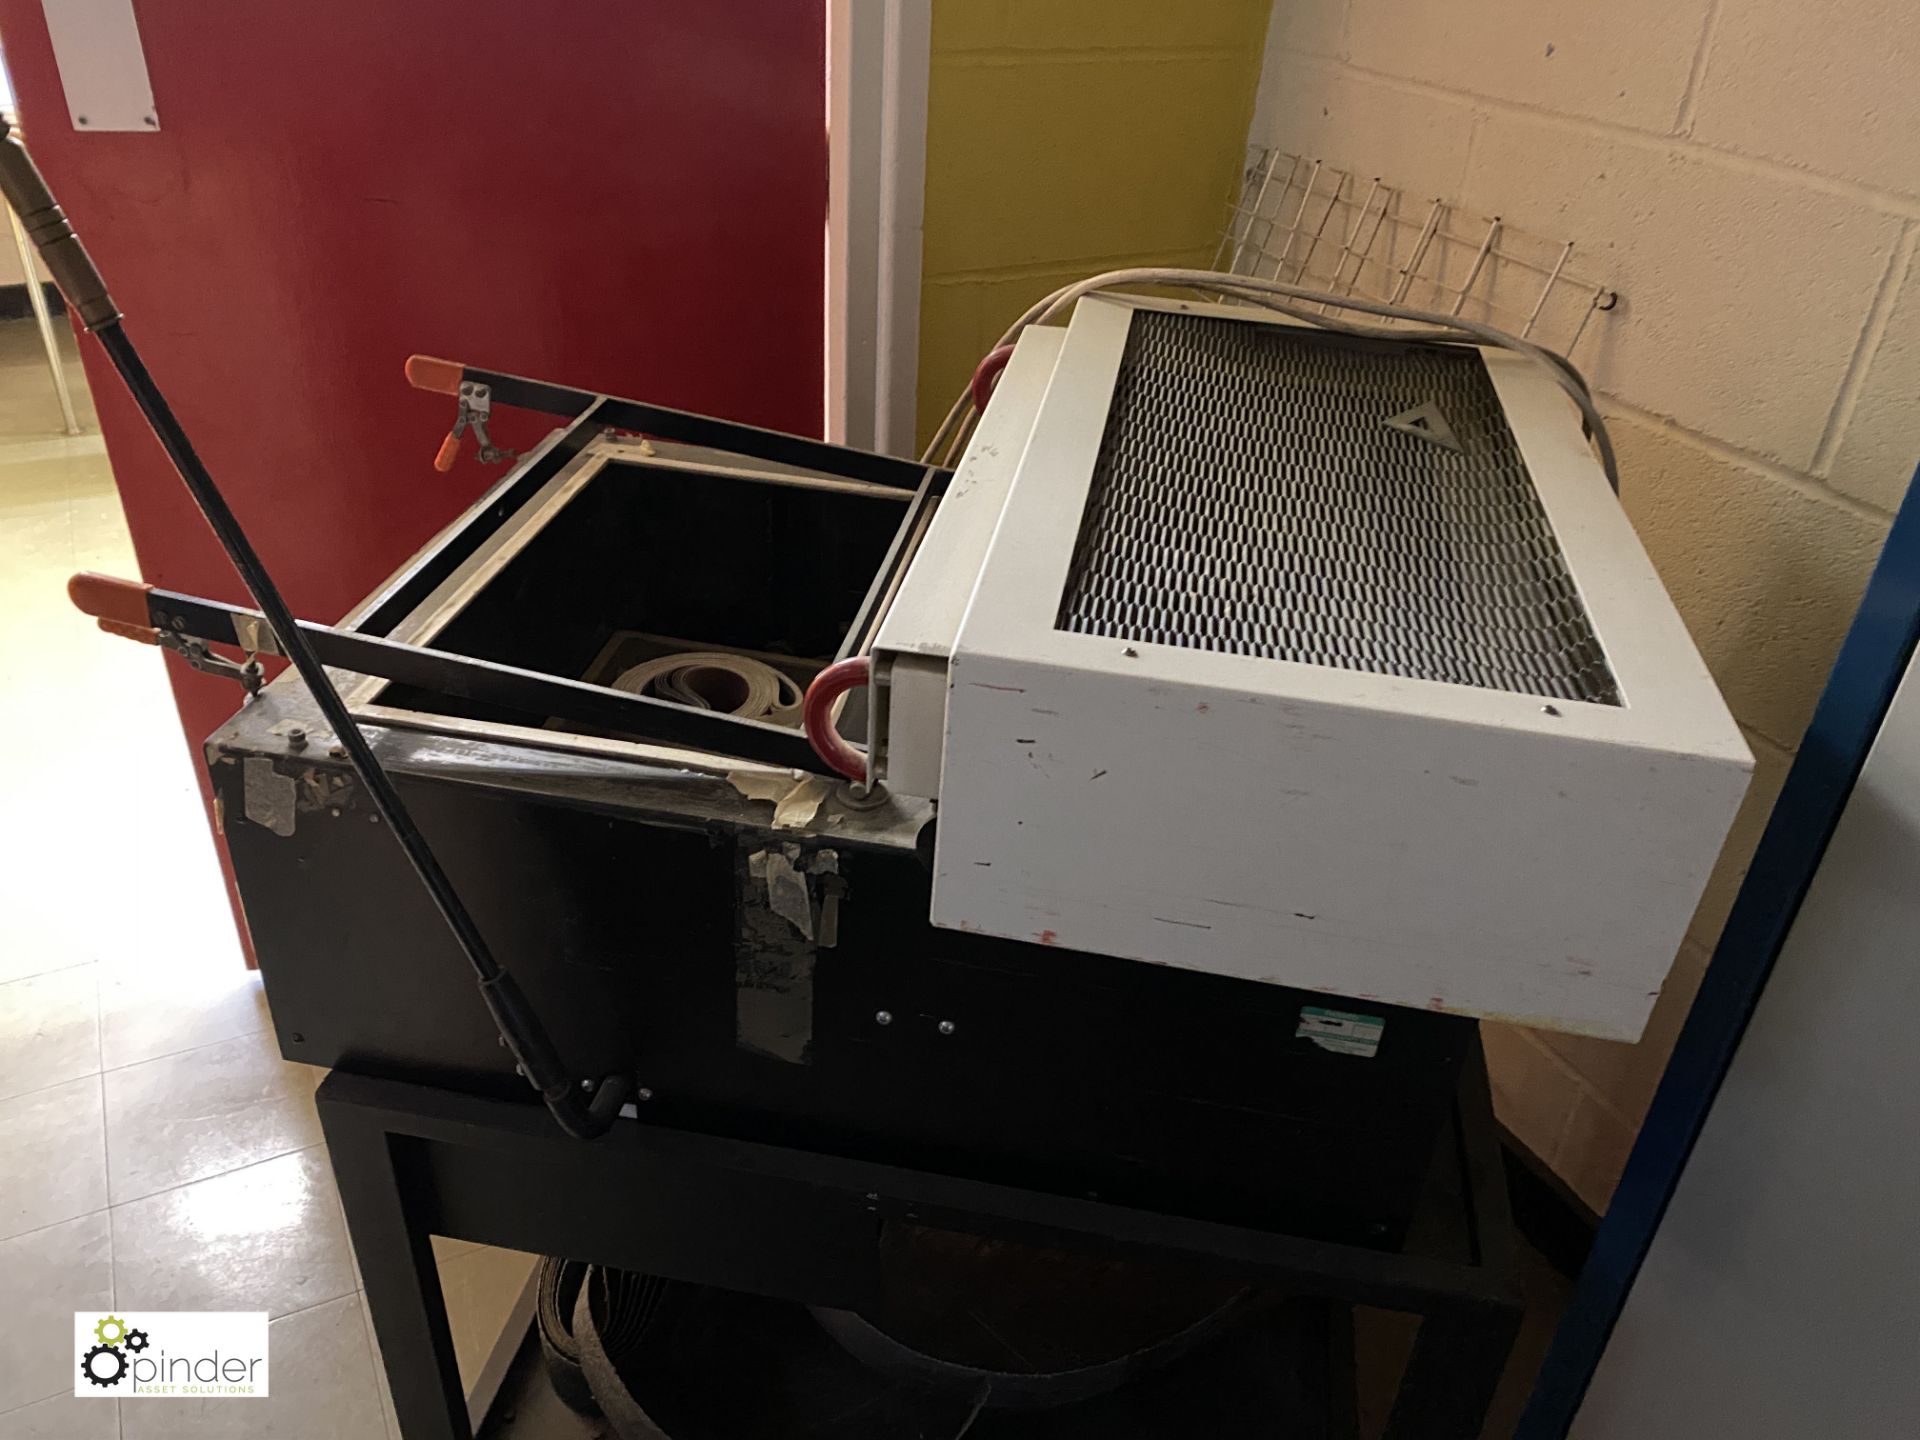 Formech 300X Vacuum Forming Machine, 240volts, serial number 32217, trolley not included (in Tec 1 - Image 5 of 7